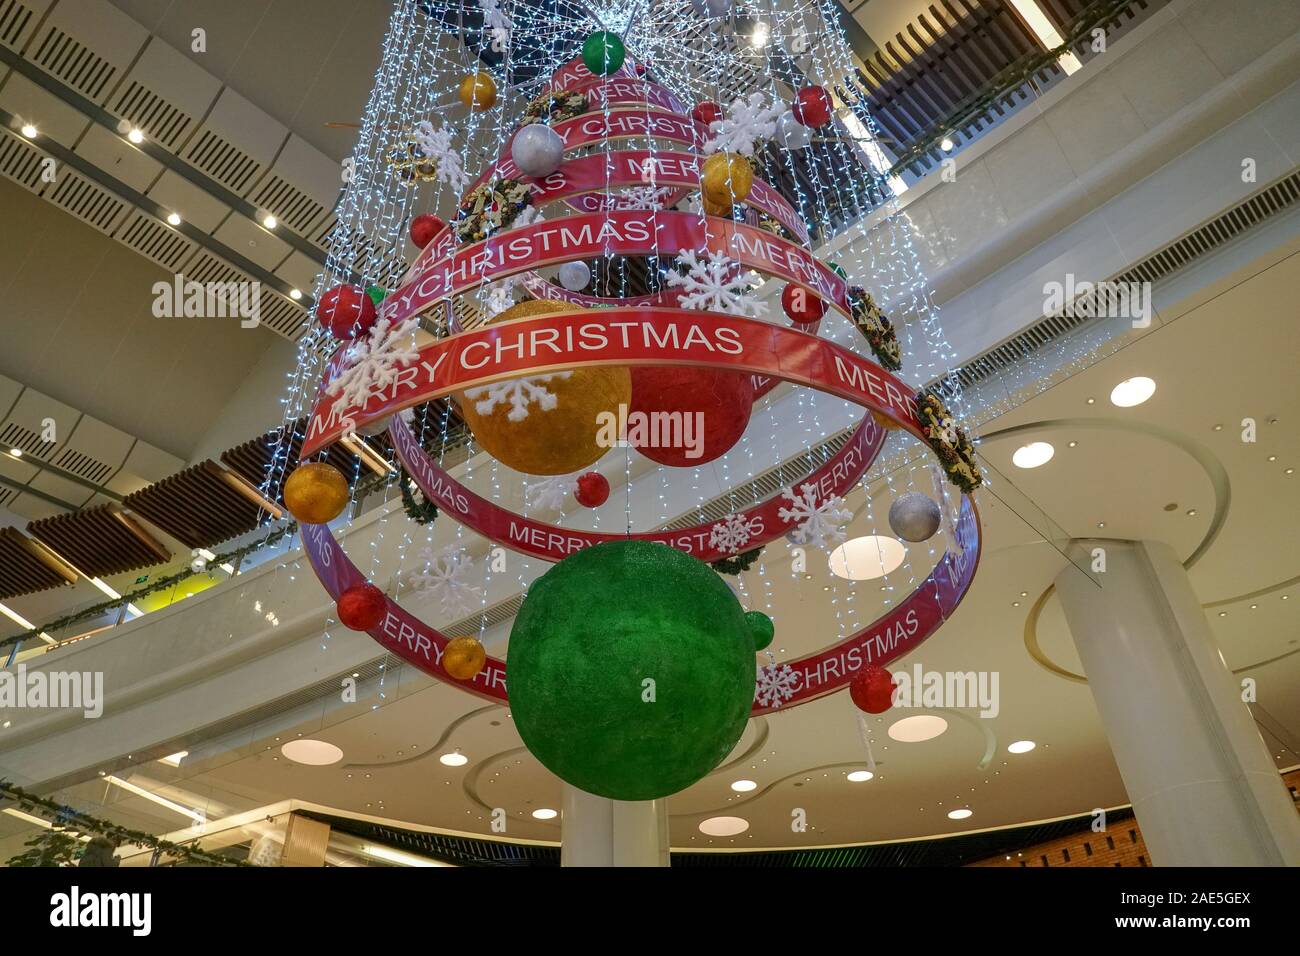 Multilevel shopping mall interior decorated with Christmas decoration in Beijing, China.Shopping mall decorated for Merry Christmas and New Year. December, 25th, 2019 Stock Photo